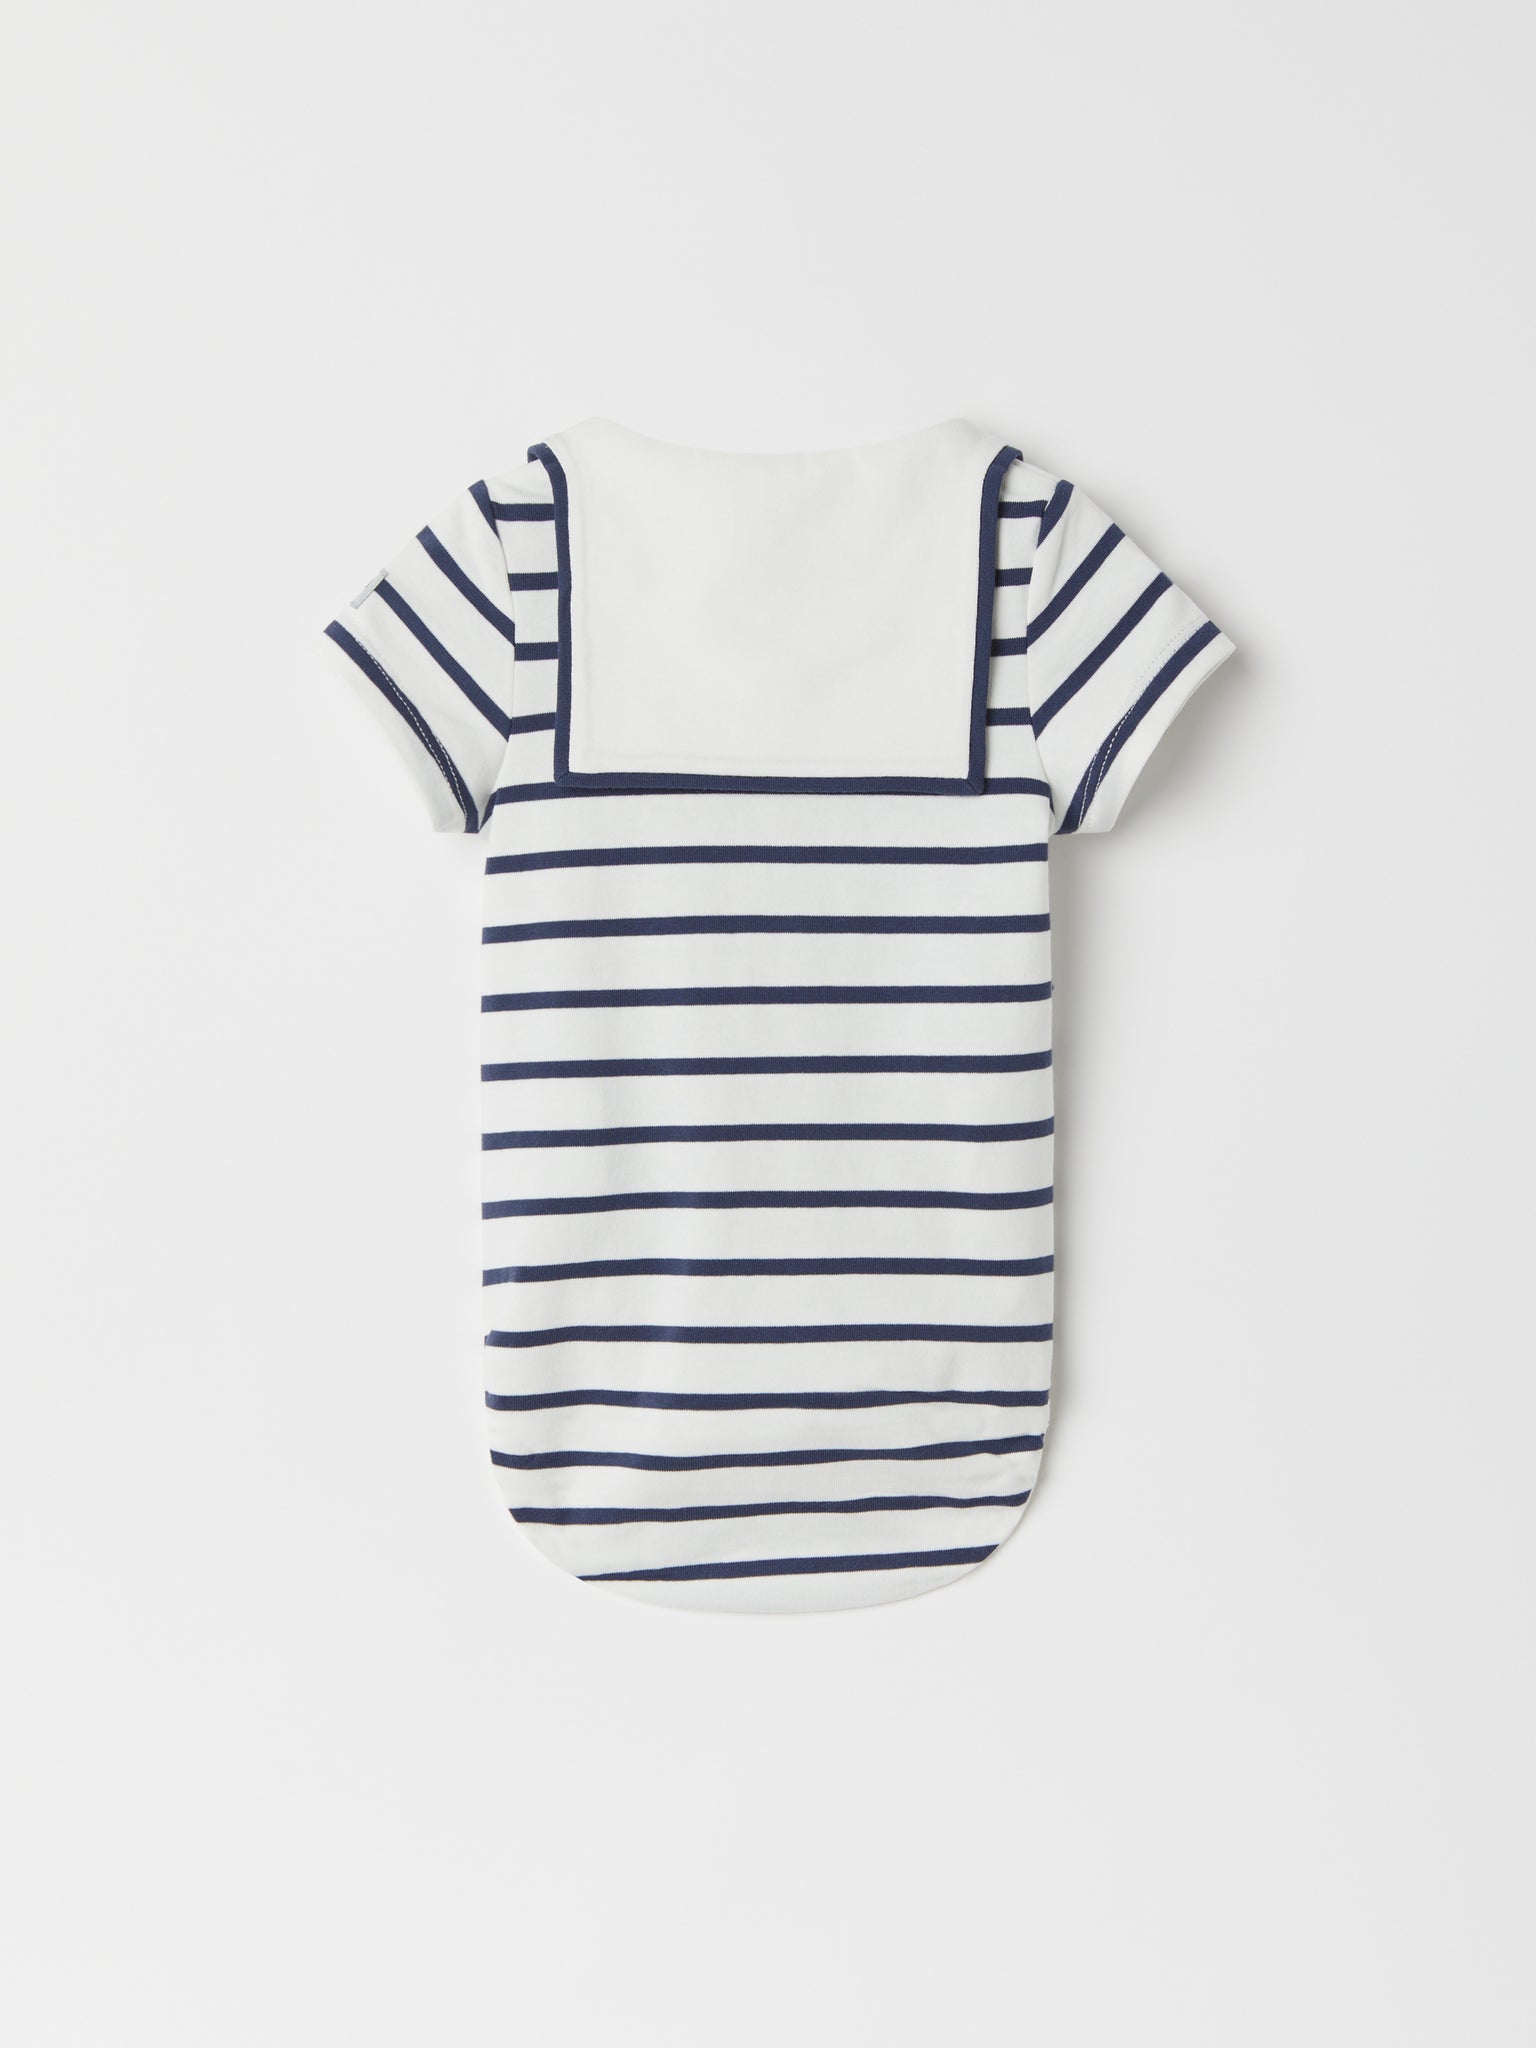 Organic Cotton Breton Stripe Short Sleeve Babygrow from the Polarn O. Pyret baby collection. Ethically produced kids clothing.